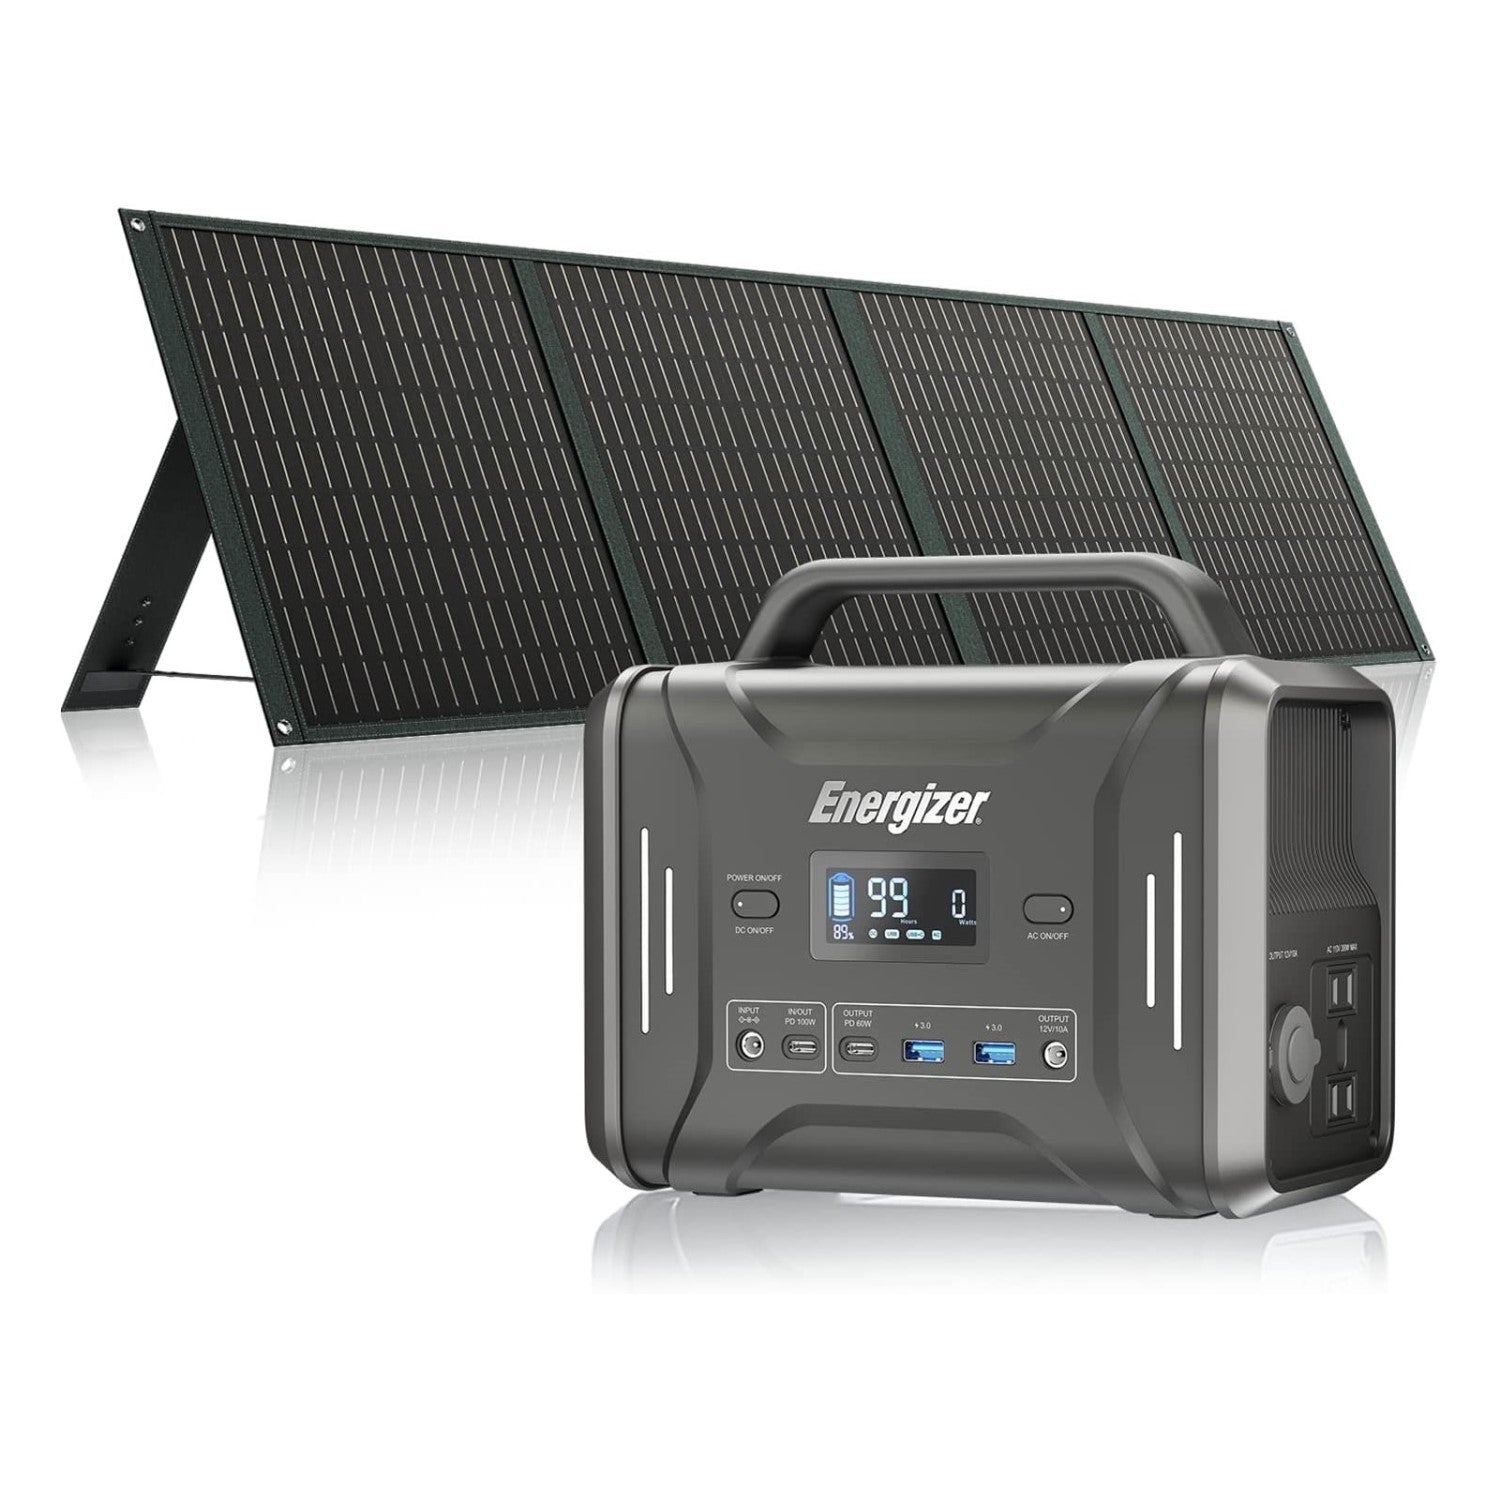 Energizador PPS320 - 300W / 320Wh